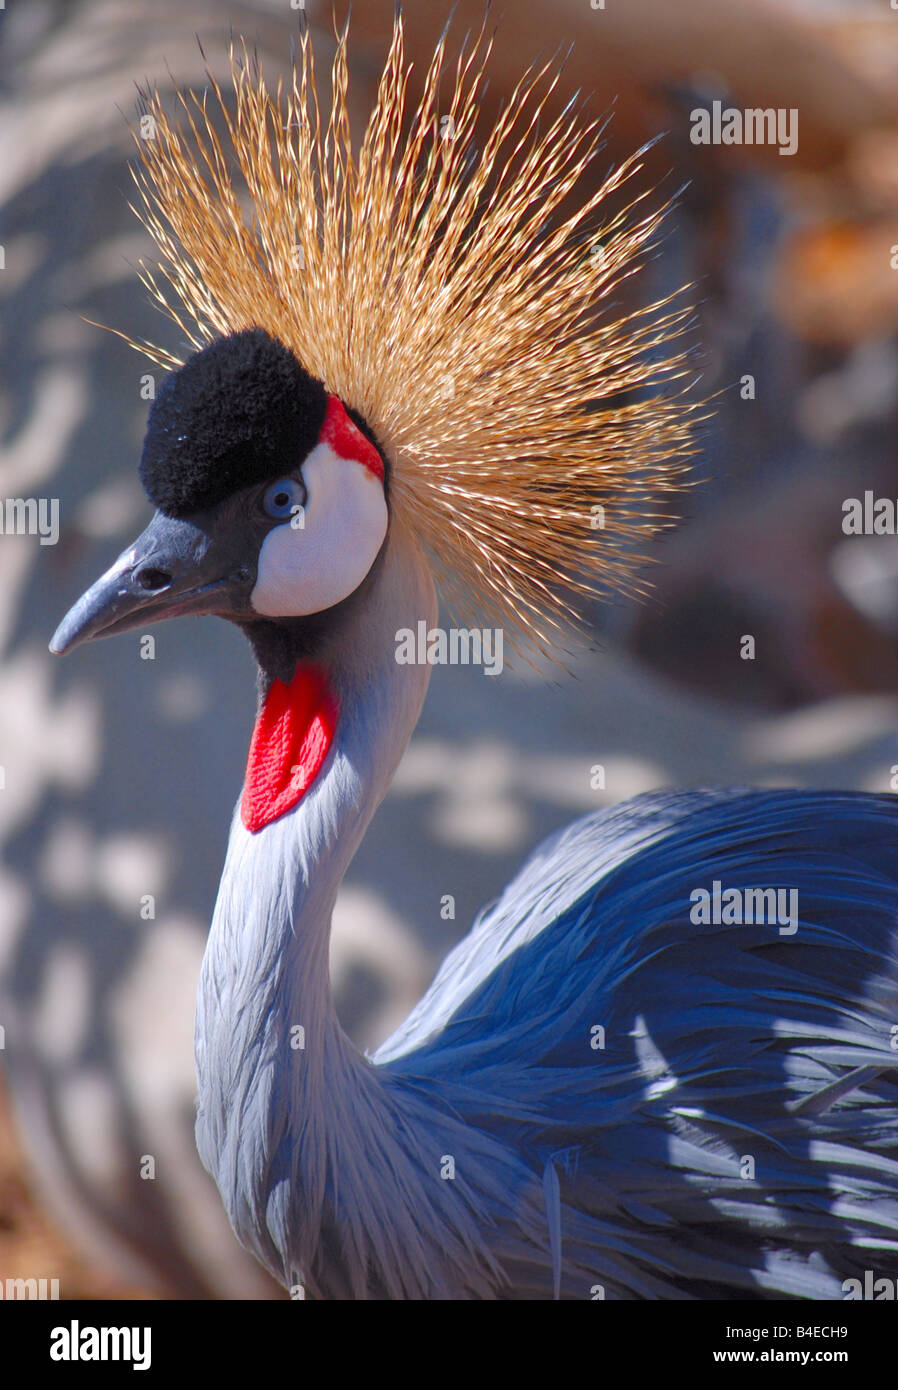 East African Crowned Crane Foto Stock